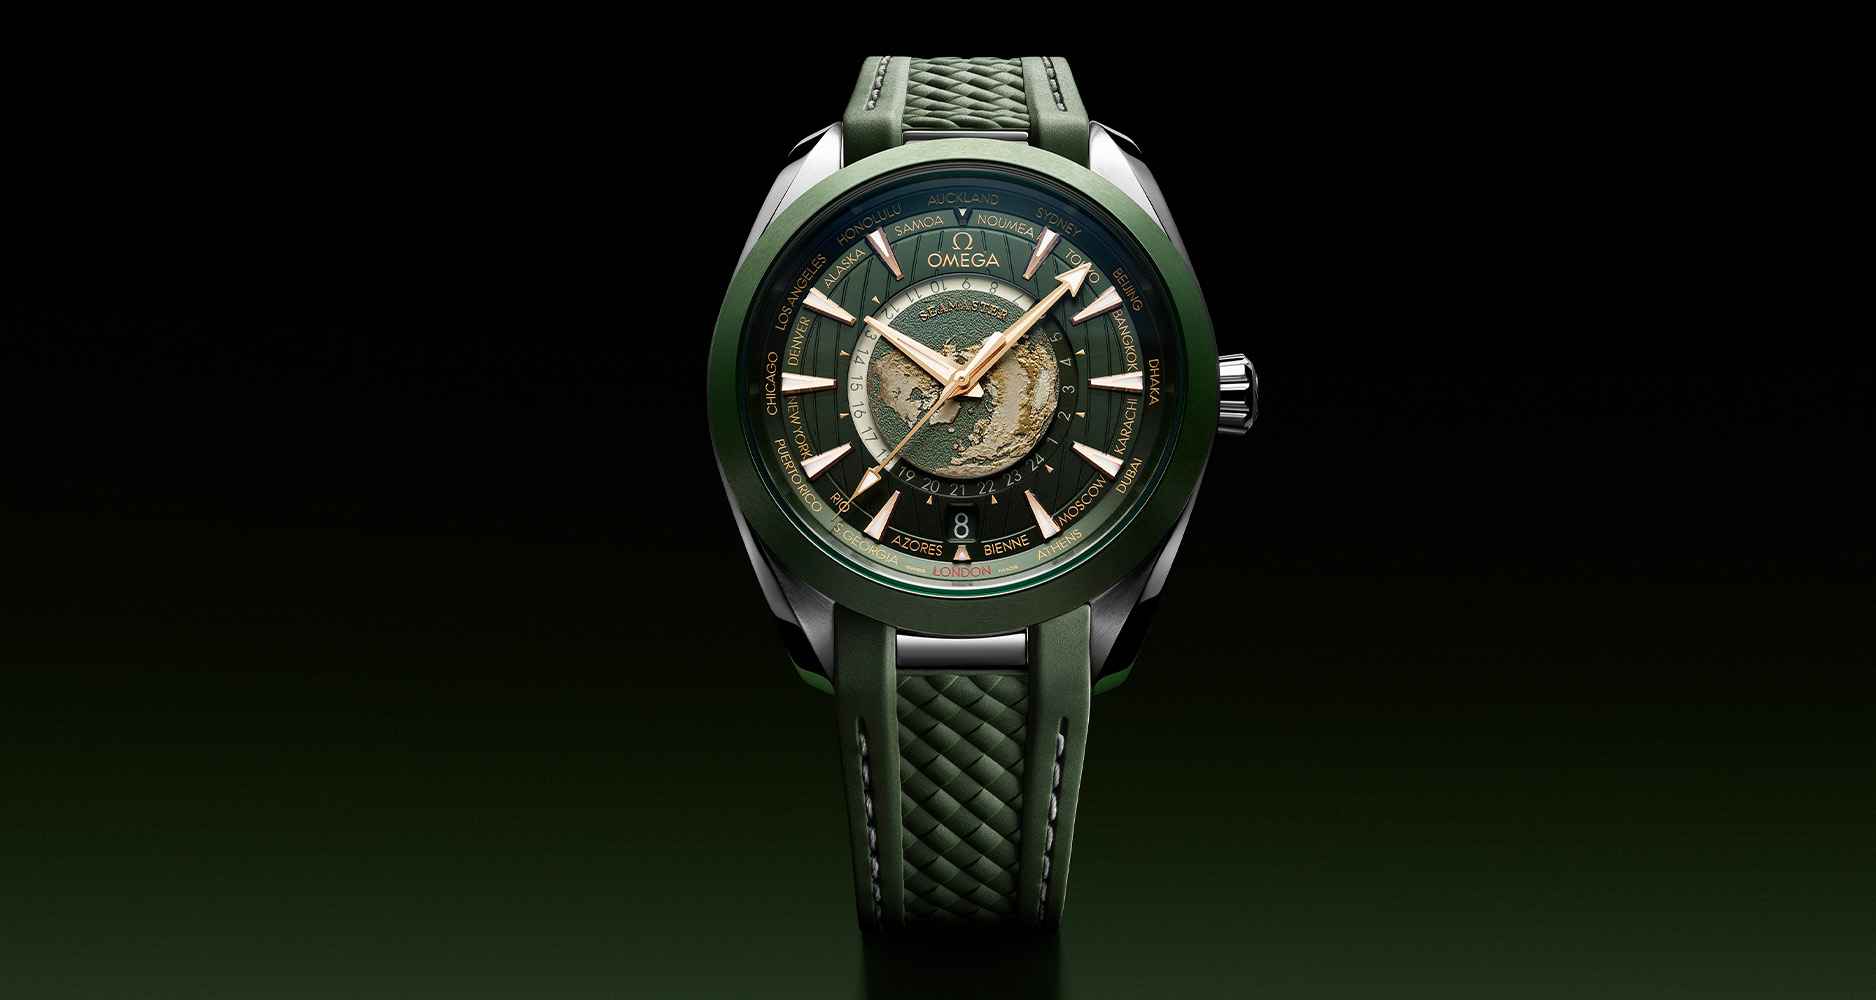 The Omega Seamaster Aqua Terra Worldtimer in stainless steel with green ceramic bezel, dial and rubber strap.